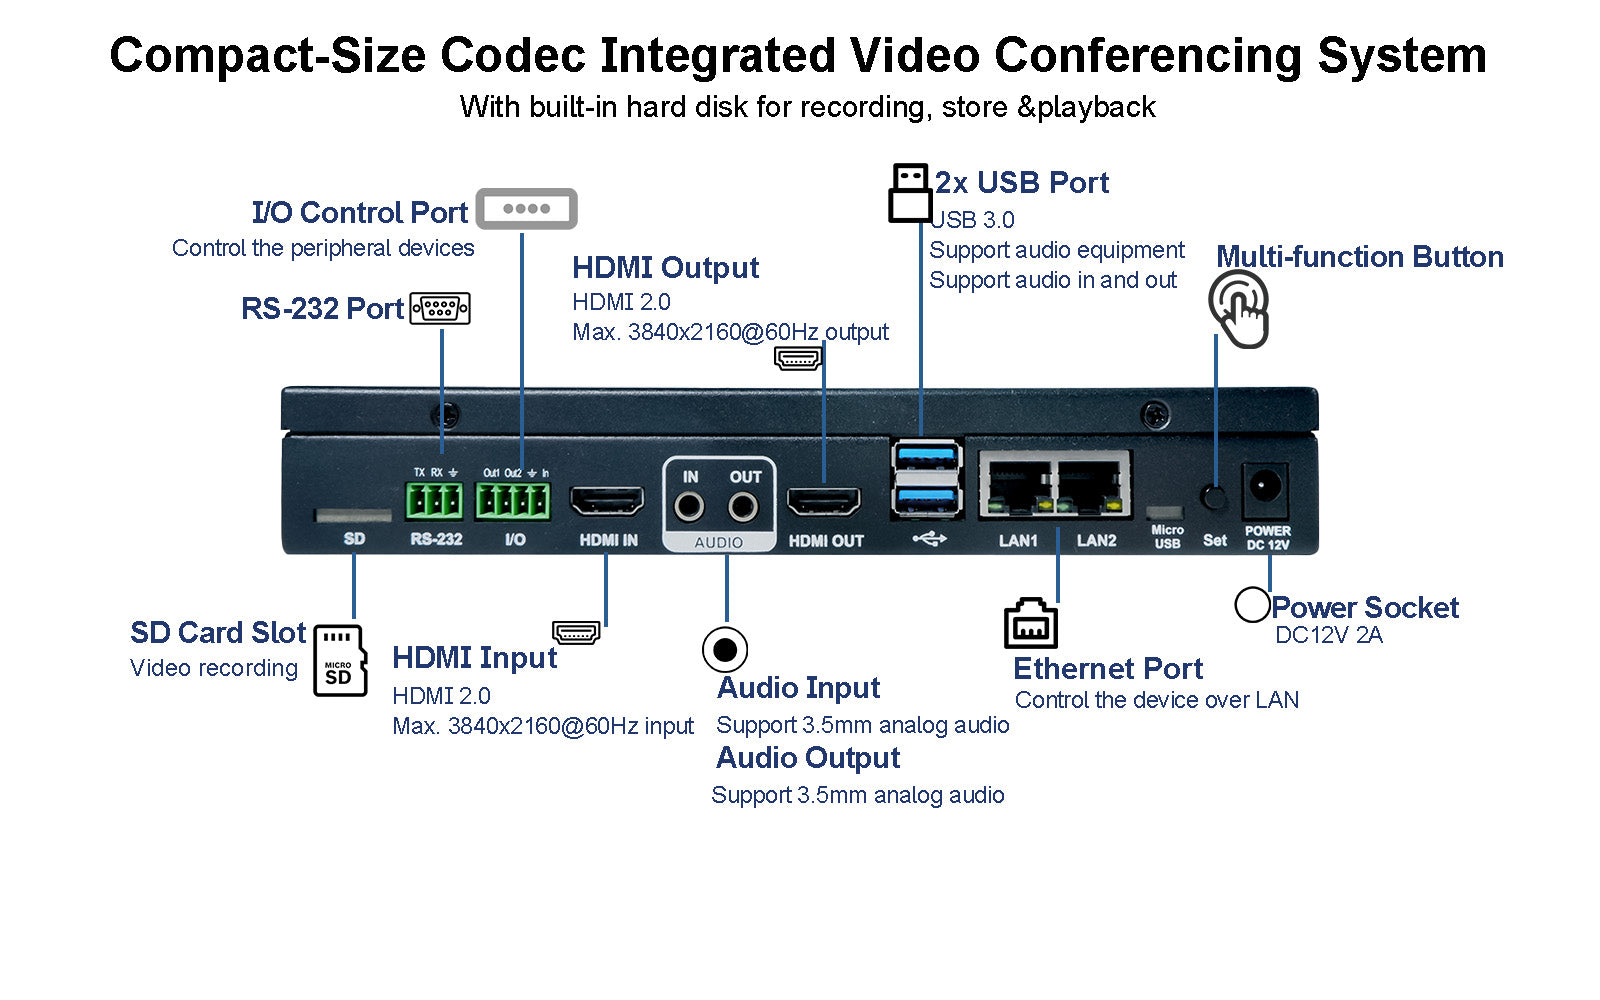 Intelligent video conferencing platform-compact size codec integrated system